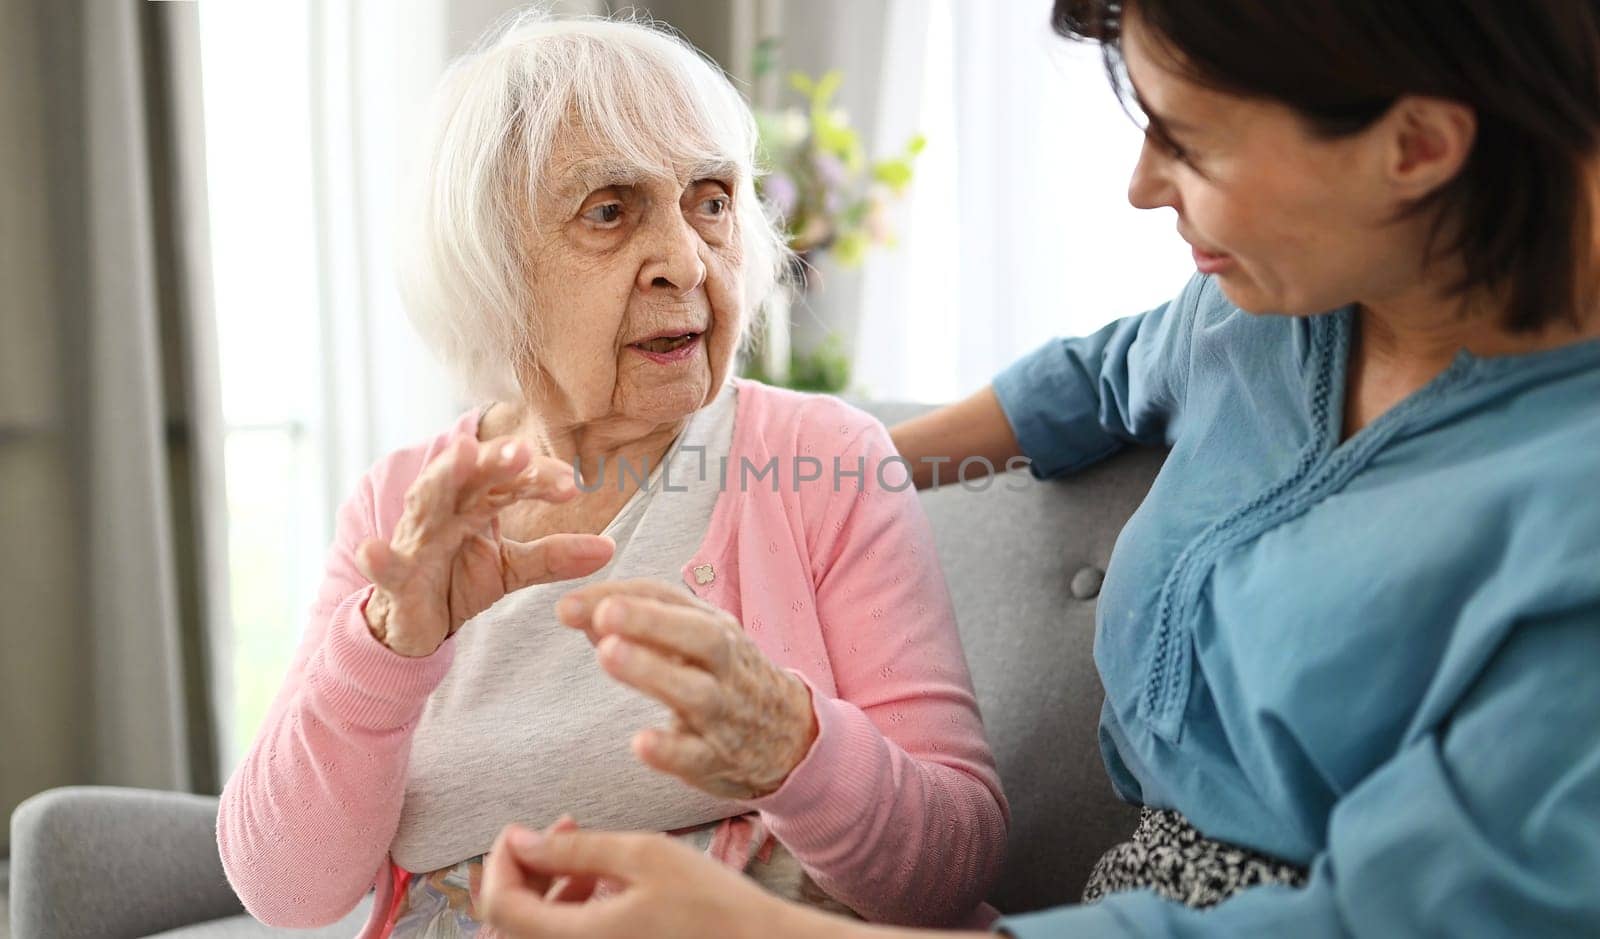 Elderly Woman Chats With Young One, Sharing Her Life Story by GekaSkr